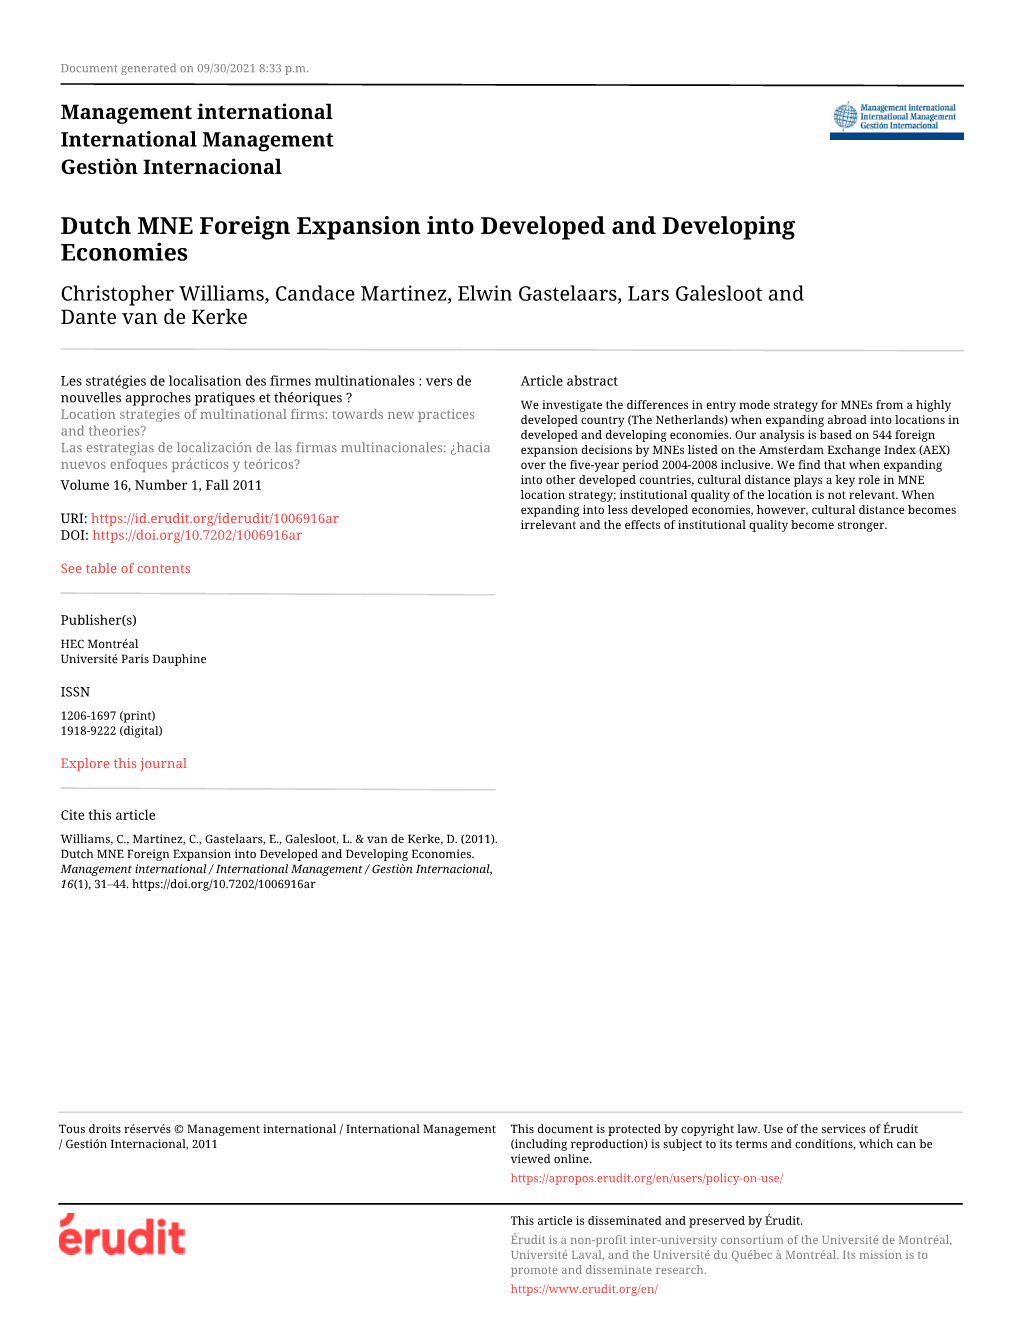 Dutch MNE Foreign Expansion Into Developed and Developing Economies Christopher Williams, Candace Martinez, Elwin Gastelaars, Lars Galesloot and Dante Van De Kerke